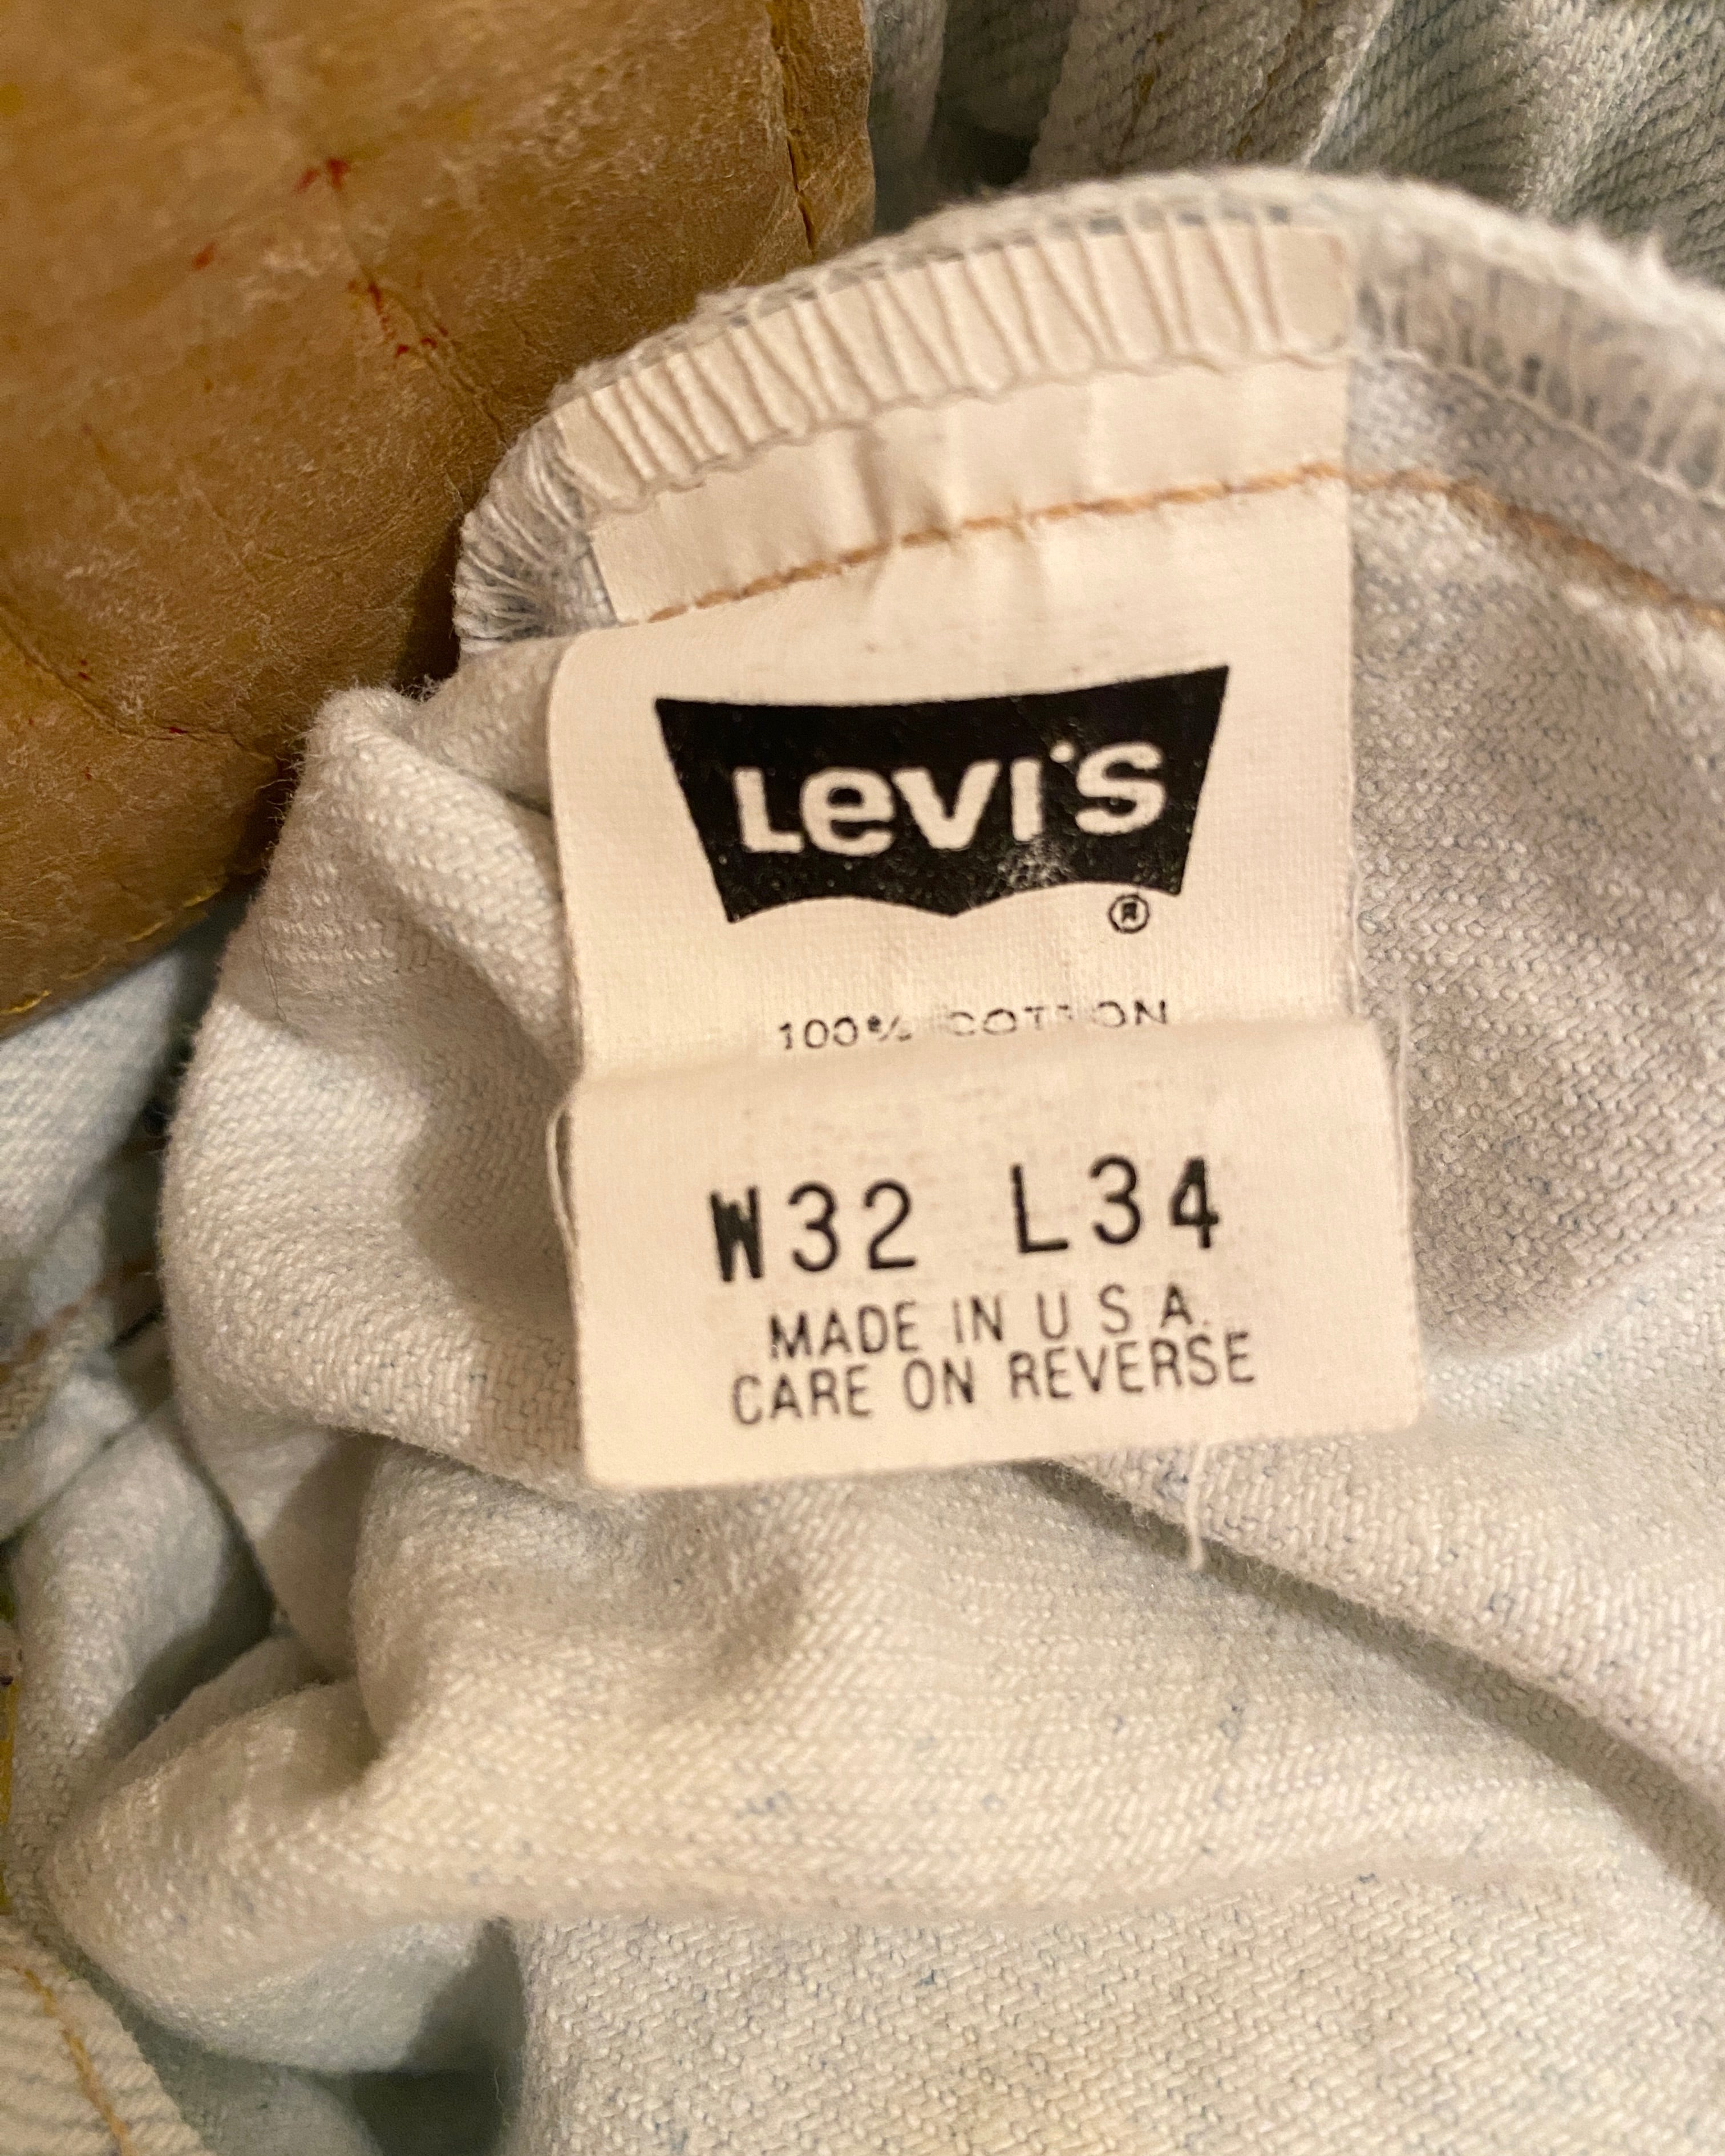 Vintage 1980s Levis 505 Light Wash Jeans size 30 or 31 Made in USA